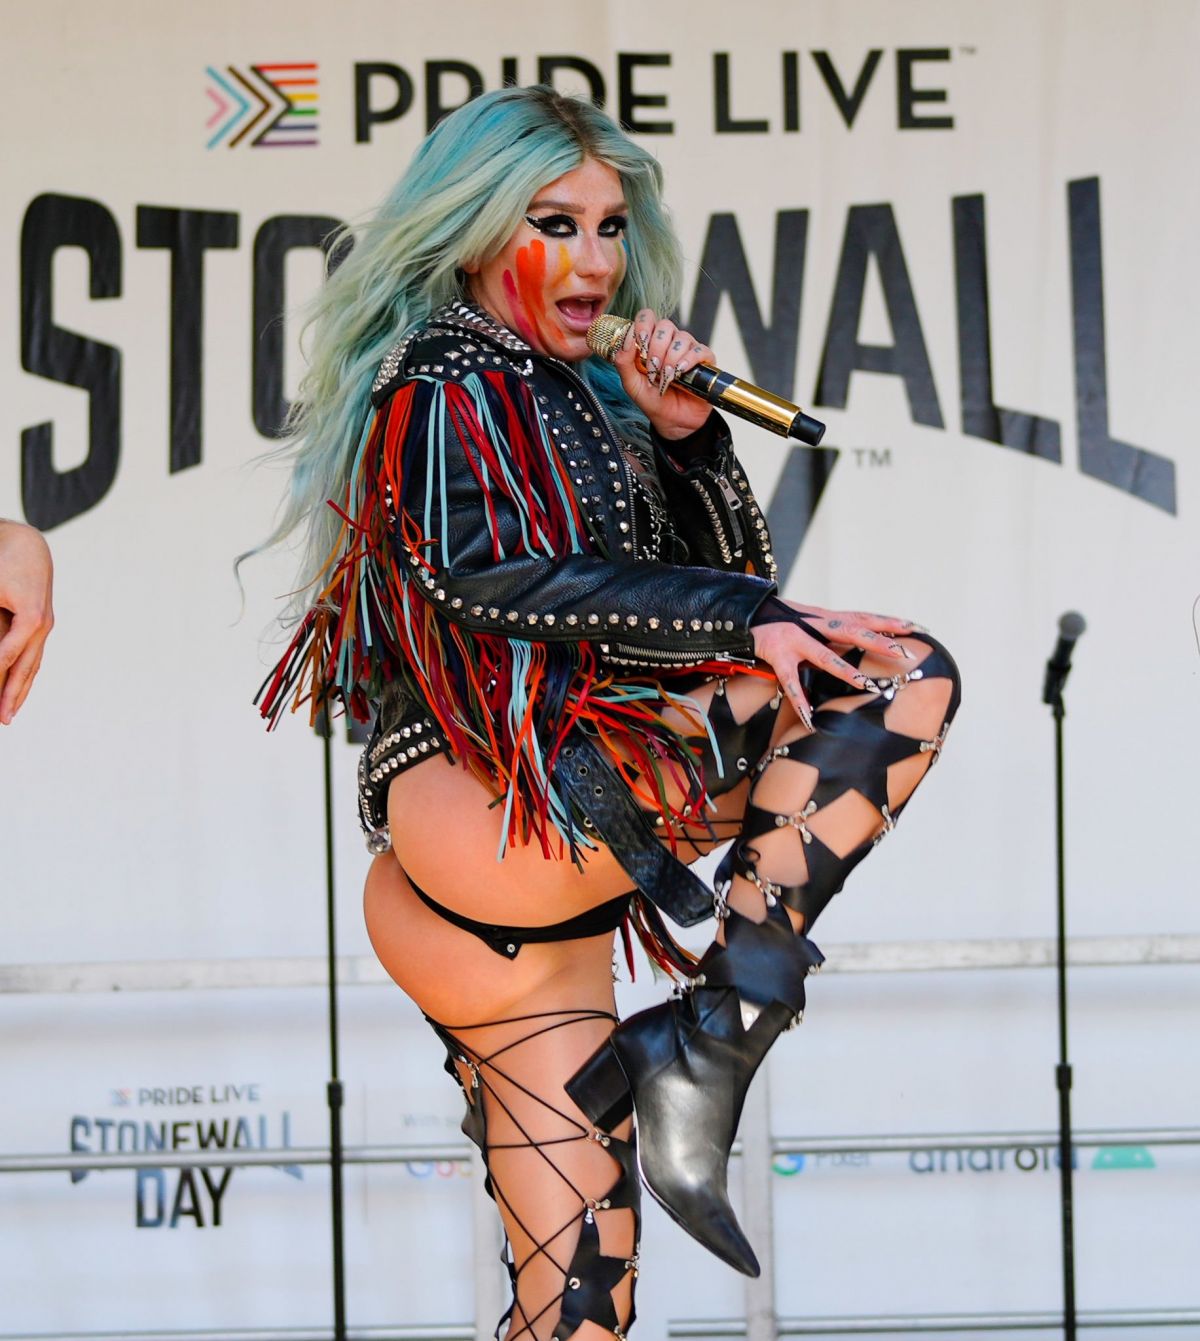 KESHA Performs at Pride Live Stonewall Day in New York 06/24/2022